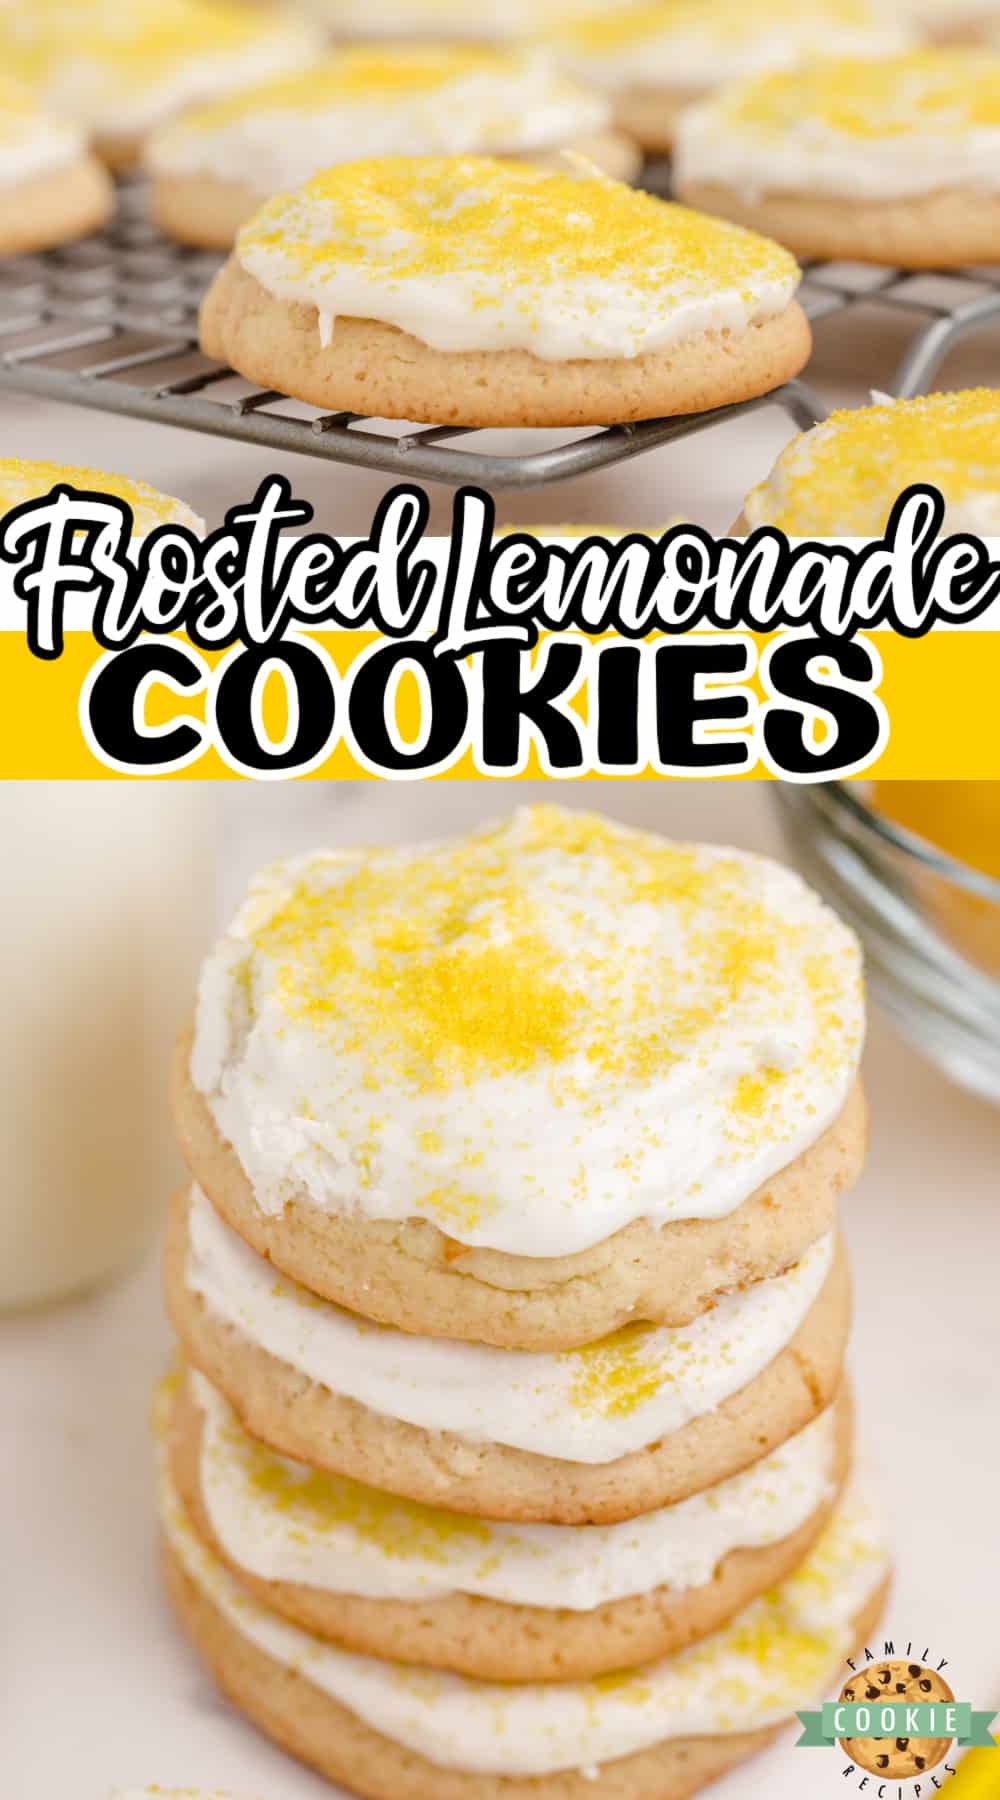 Frosted Lemonade Cookies made with lemonade concentrate in both the cookies and the frosting! Simple lemon cookie recipe packed with lemon flavor! via @buttergirls